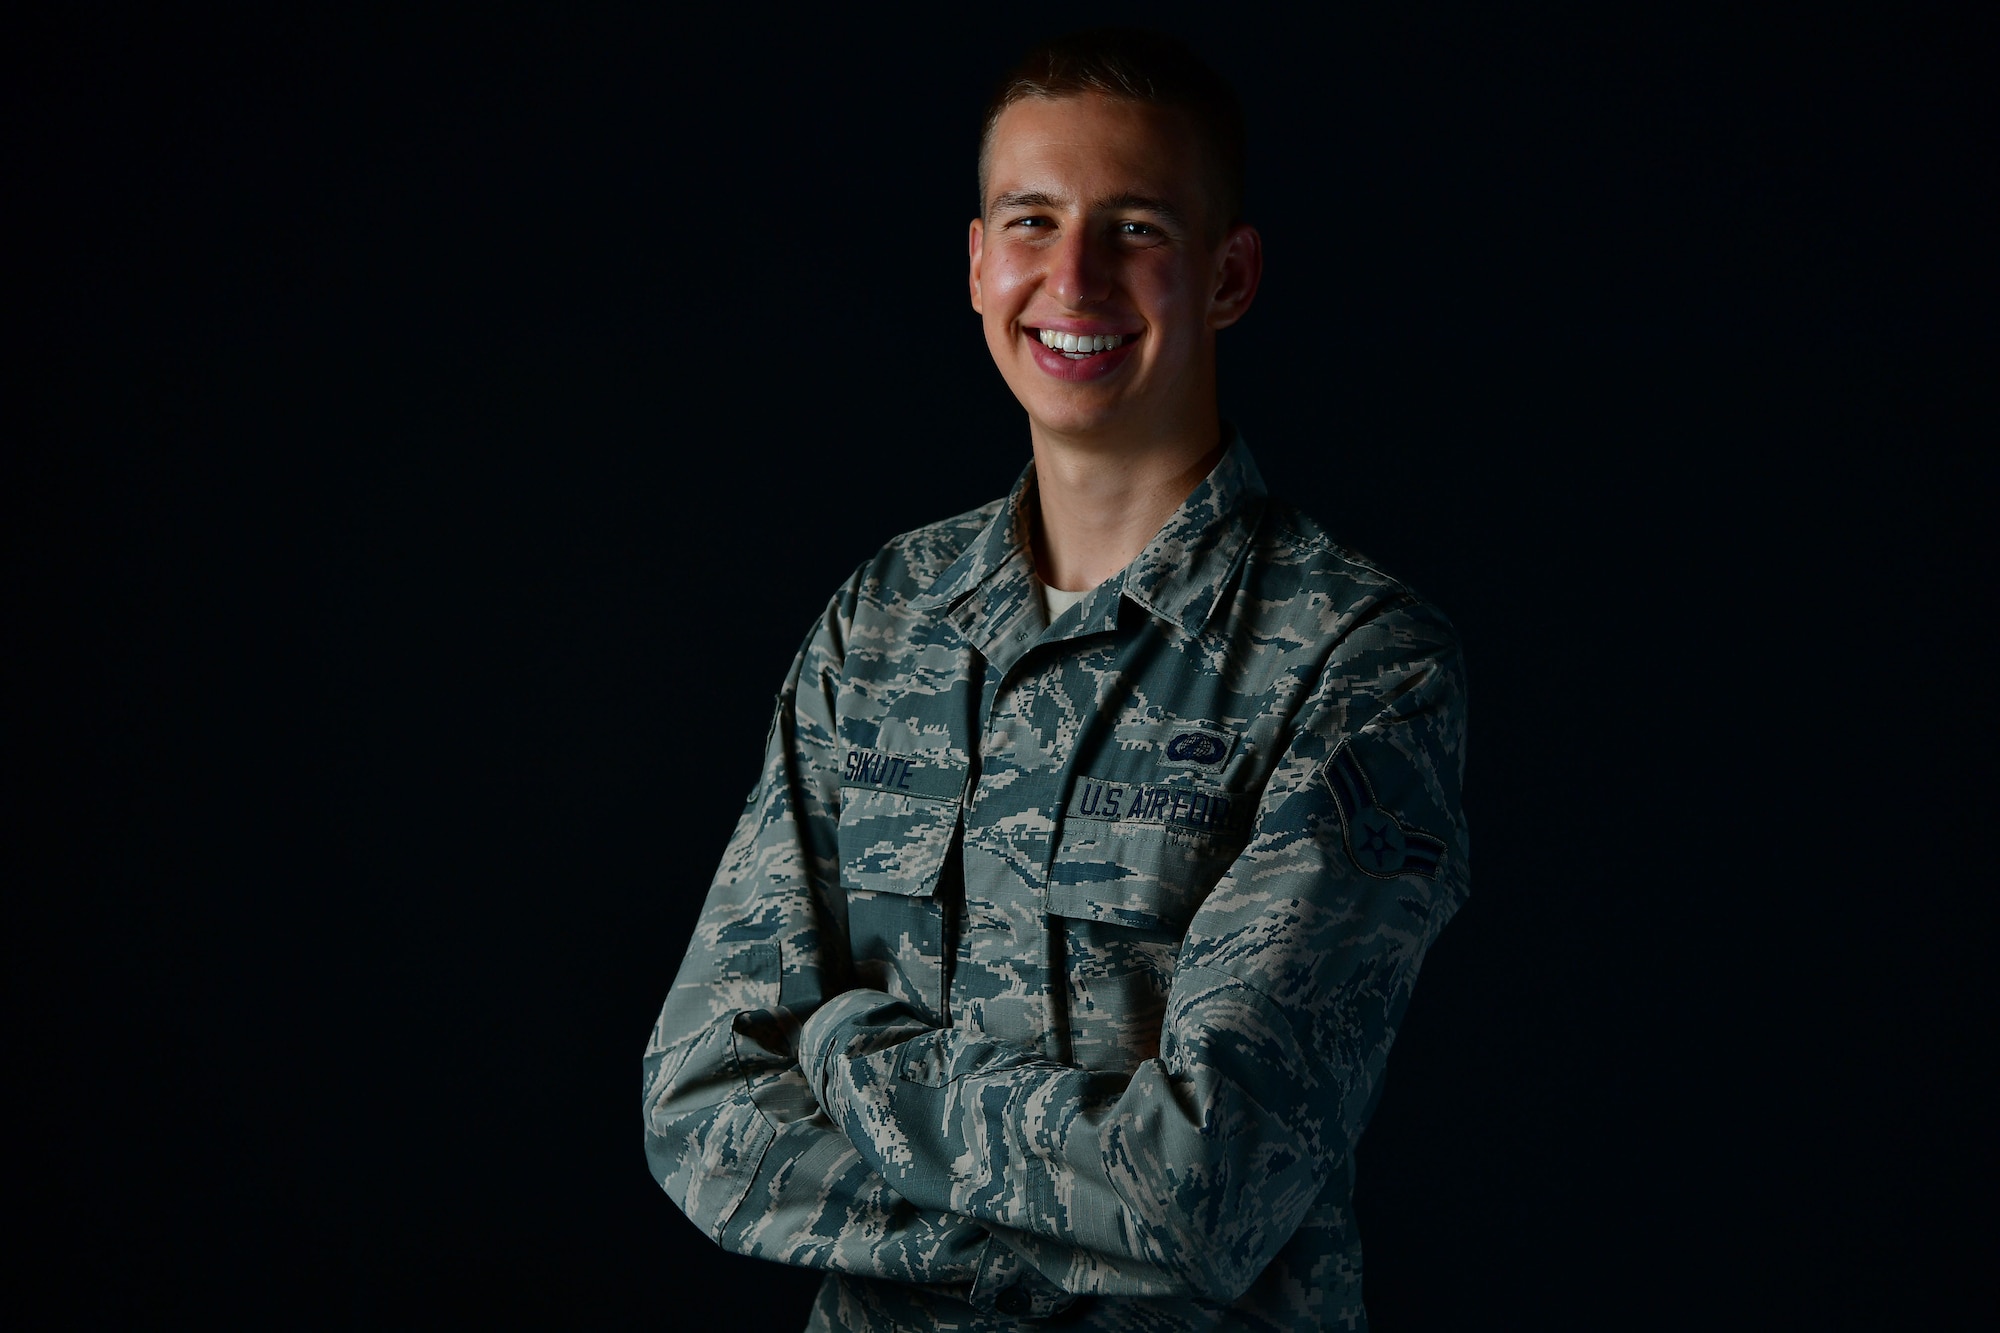 An Airman poses for a photo in the studio.